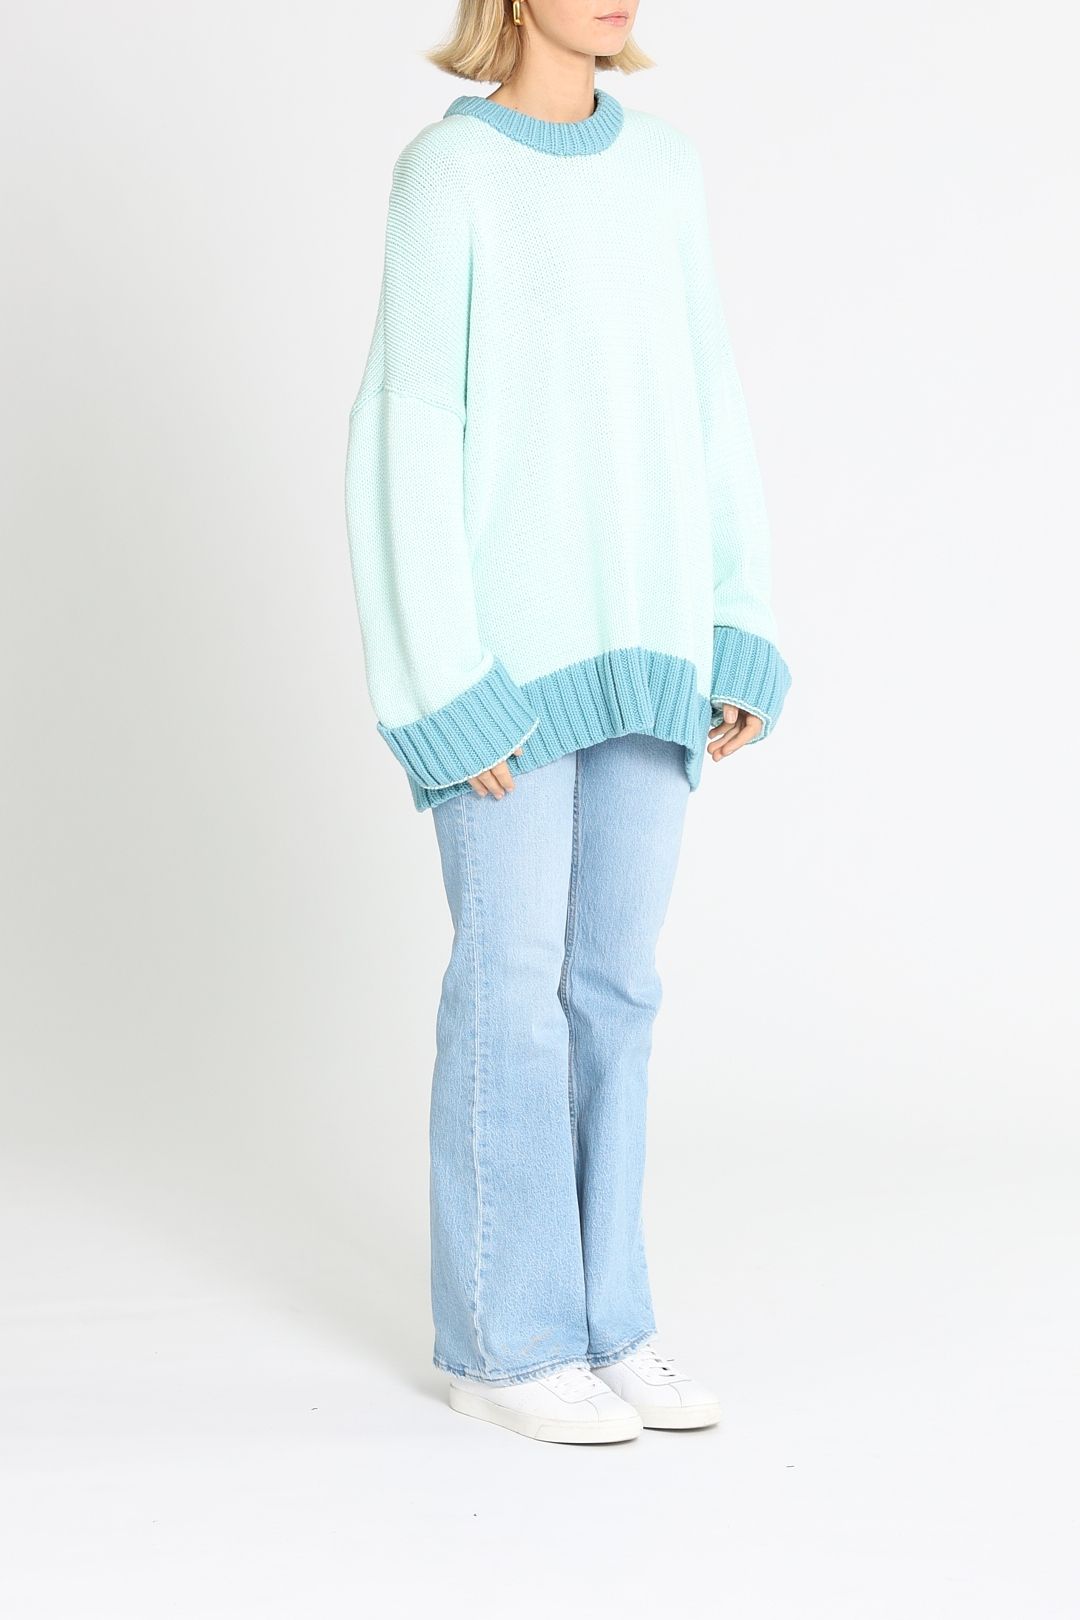 Blanca Chambord Knit Blue Relaxed Fit